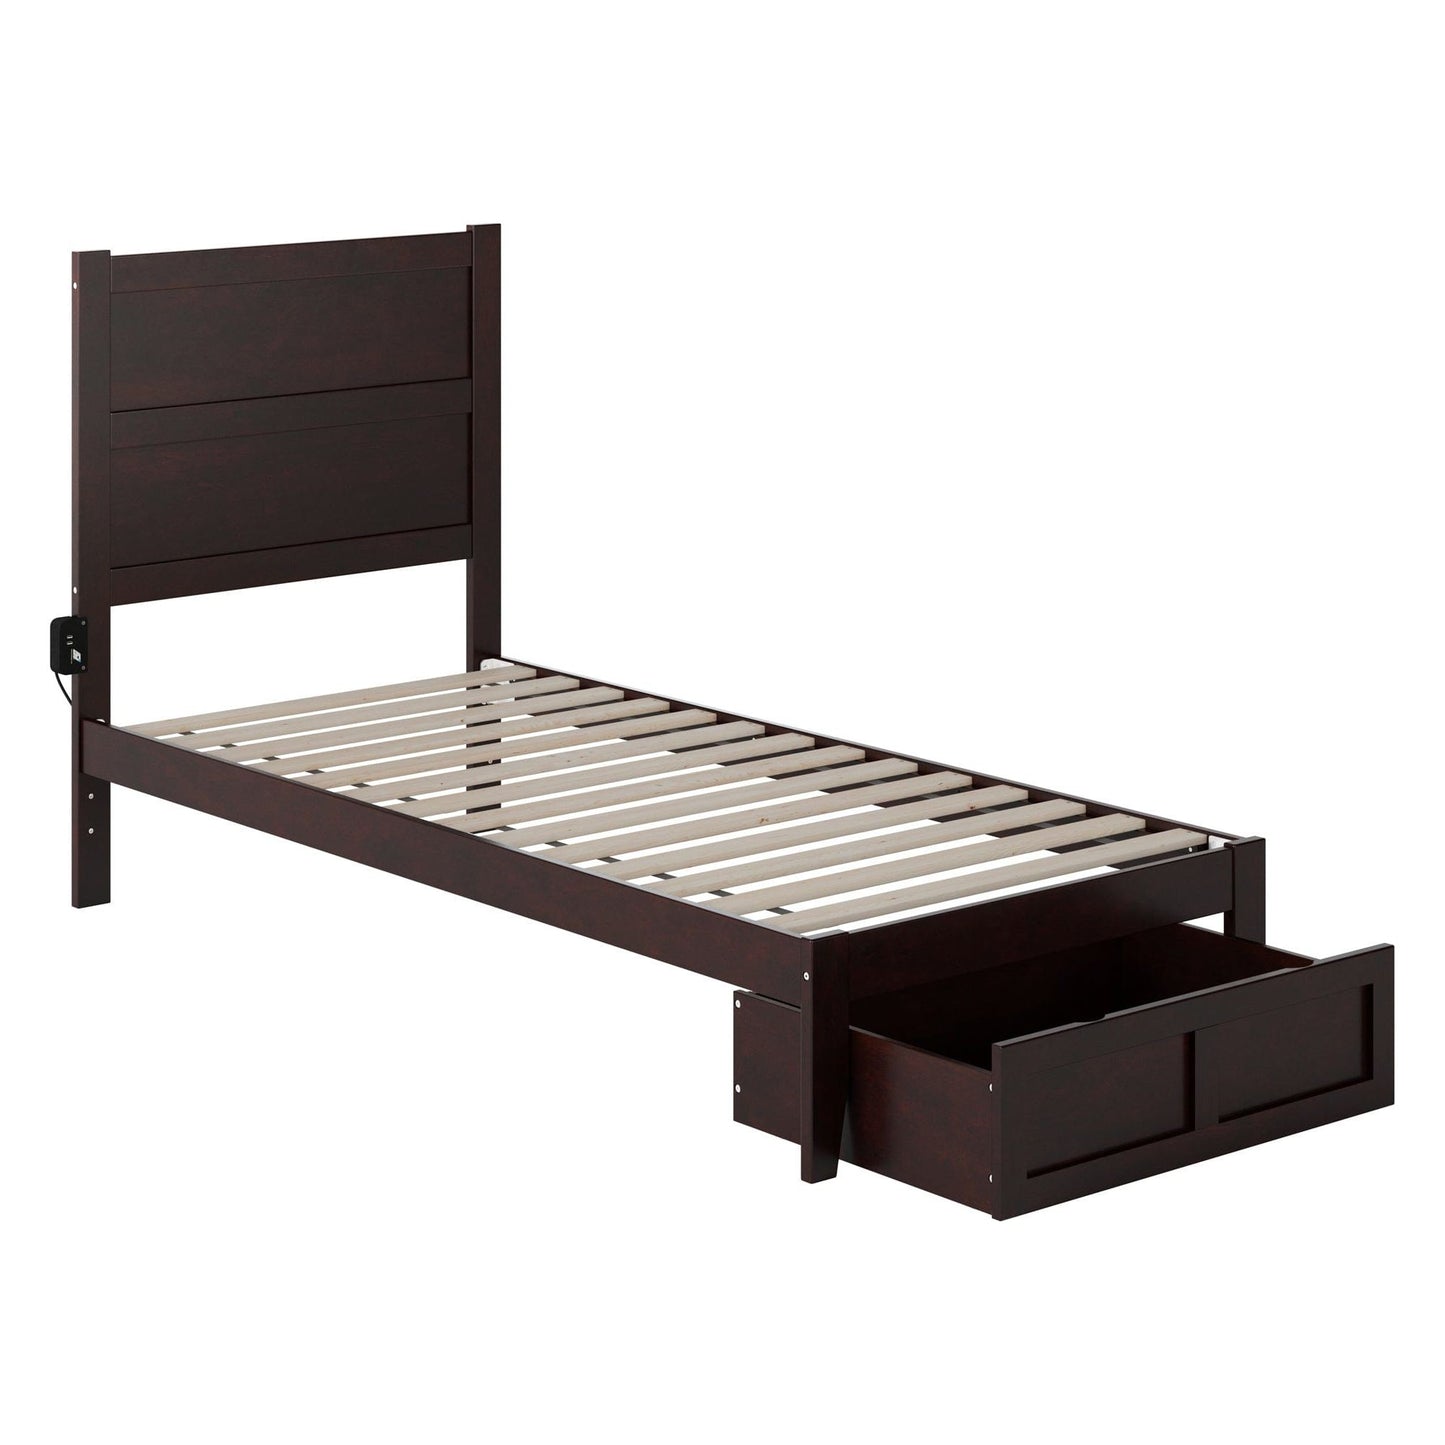 AFI Furnishings NoHo Twin Extra Long Bed with Foot Drawer in Espresso